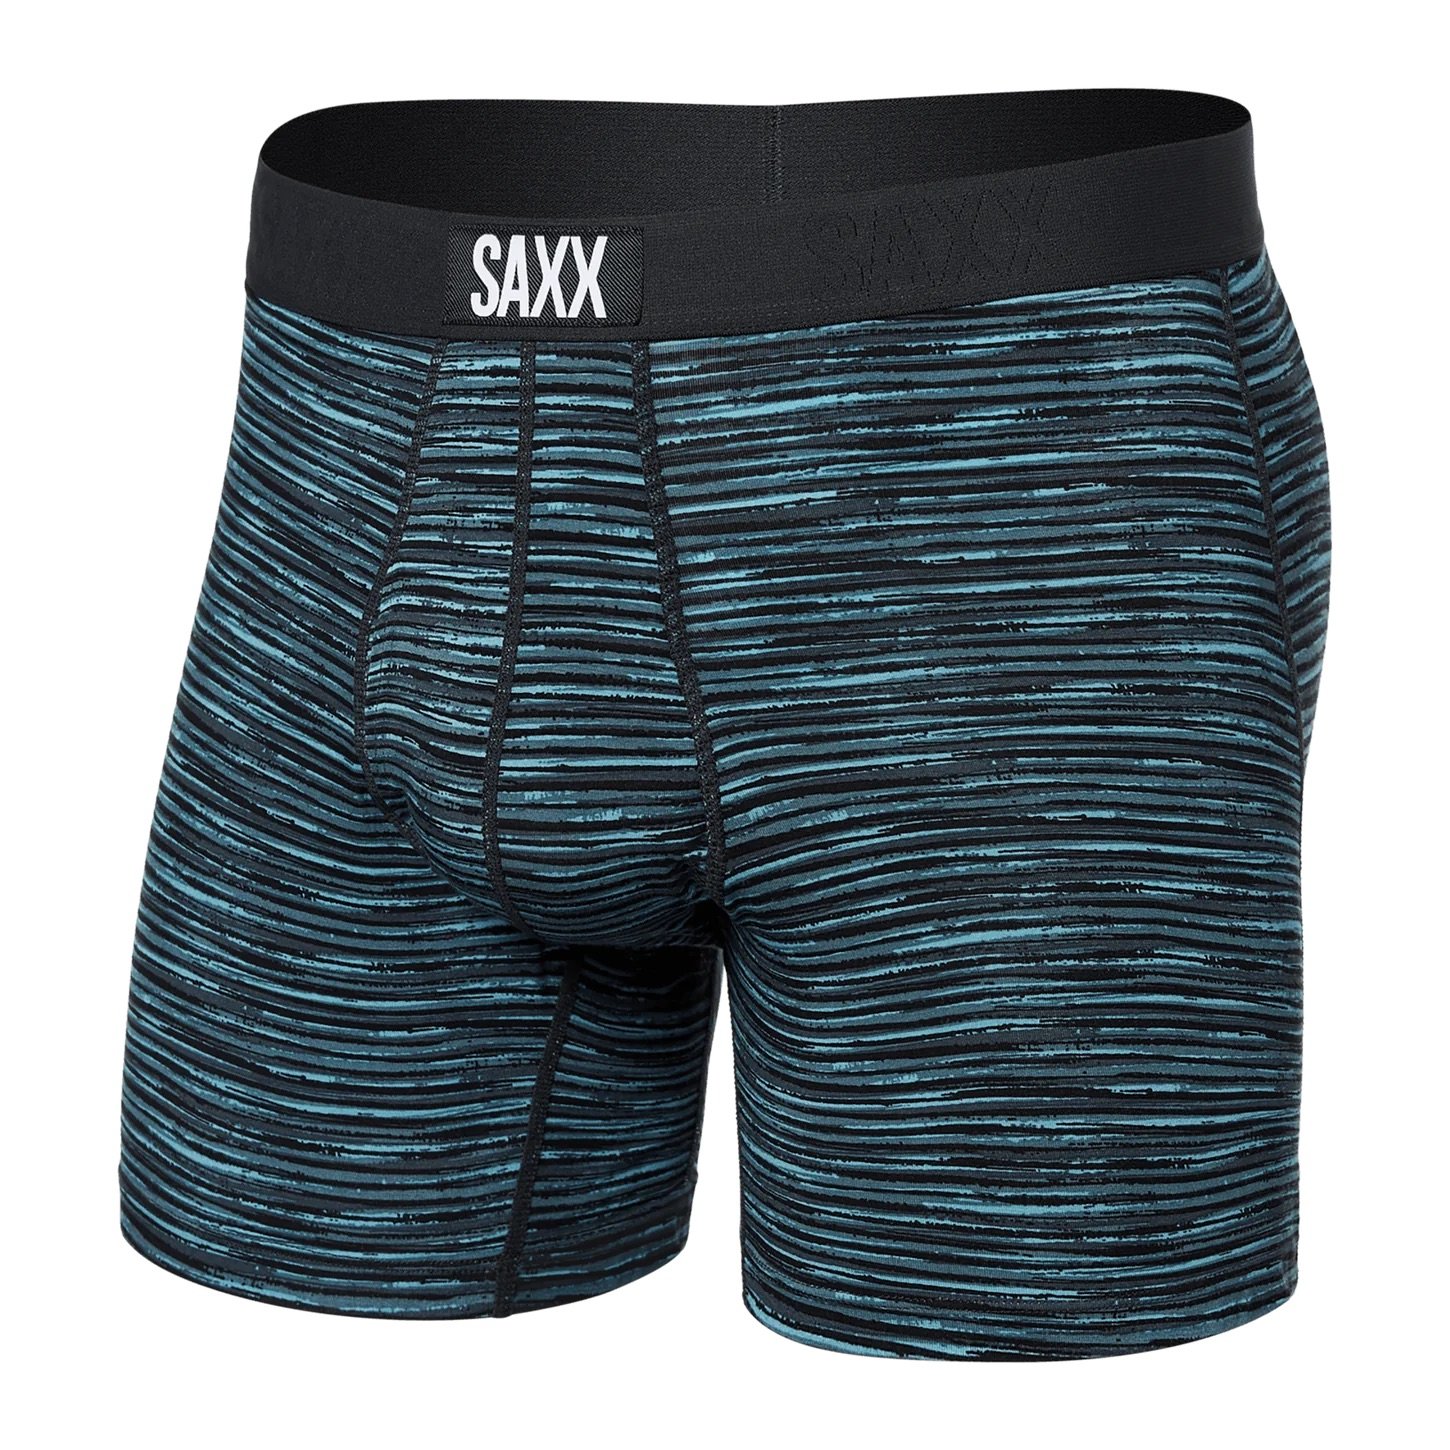 Ultra Super Soft Boxer Brief w/ Fly - SAXX (6 patterns) — Sock It